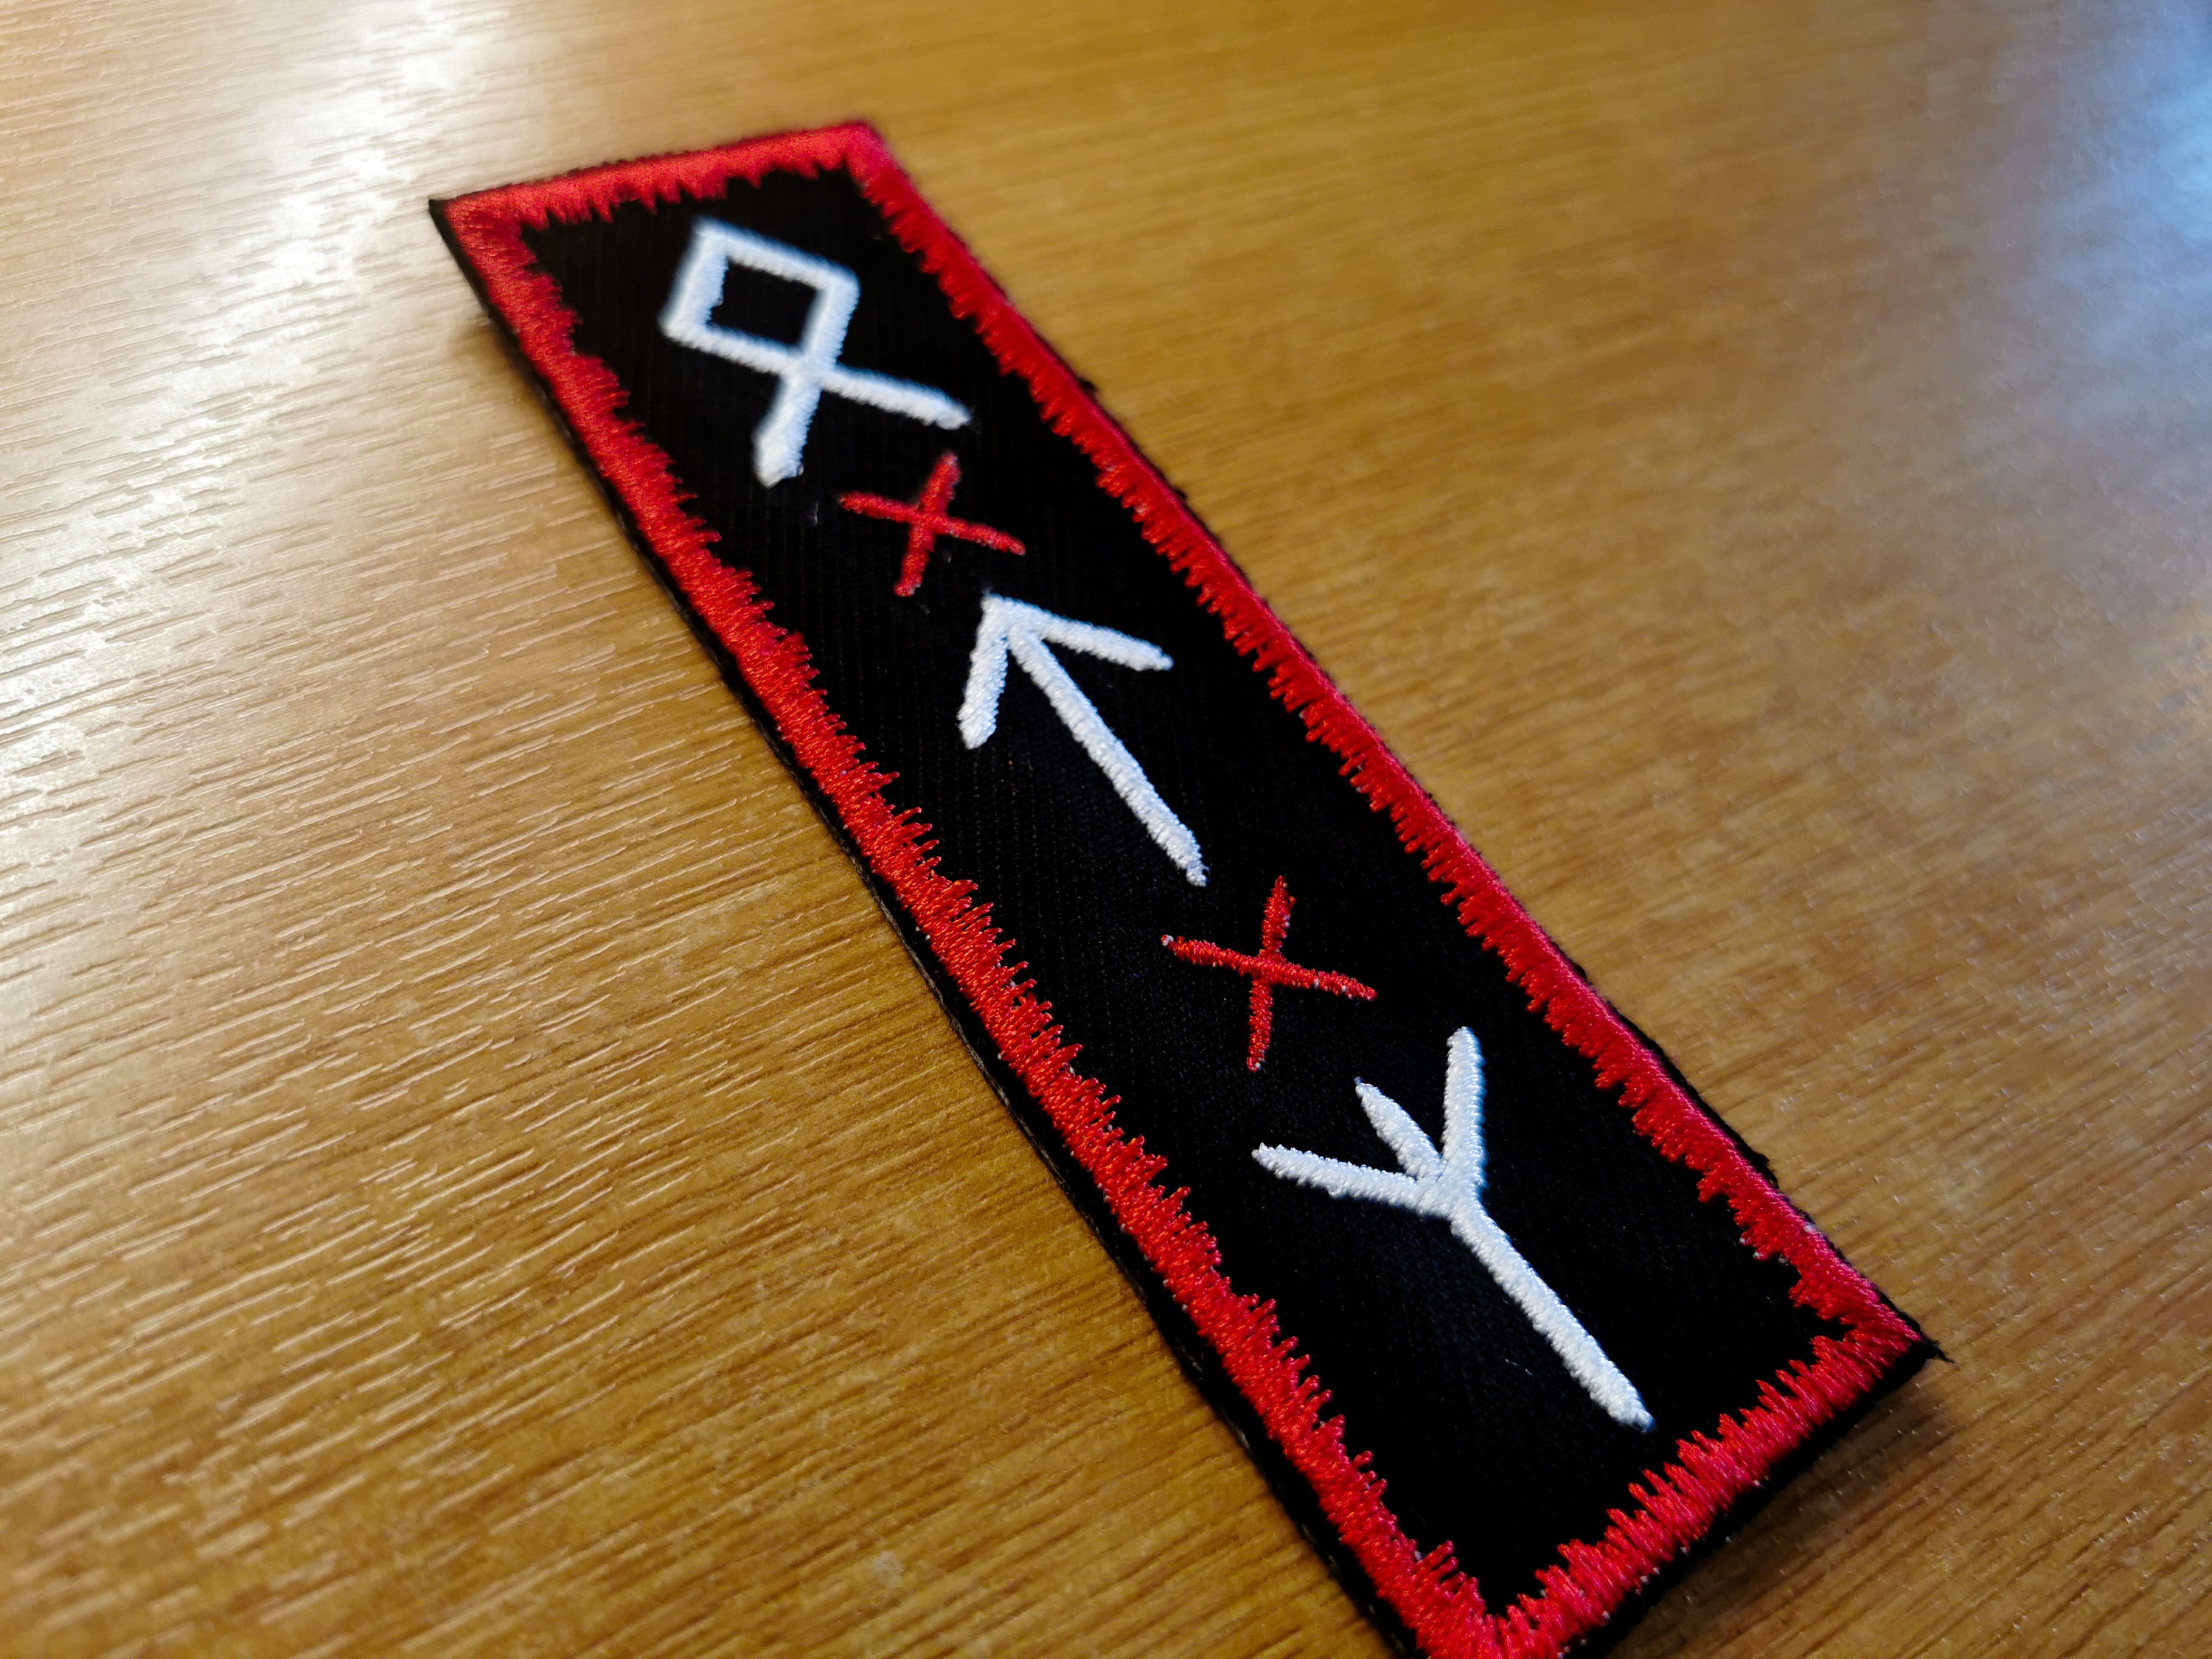 Protection Trans Flag Bindrune Viking Patch Iron On -  Portugal